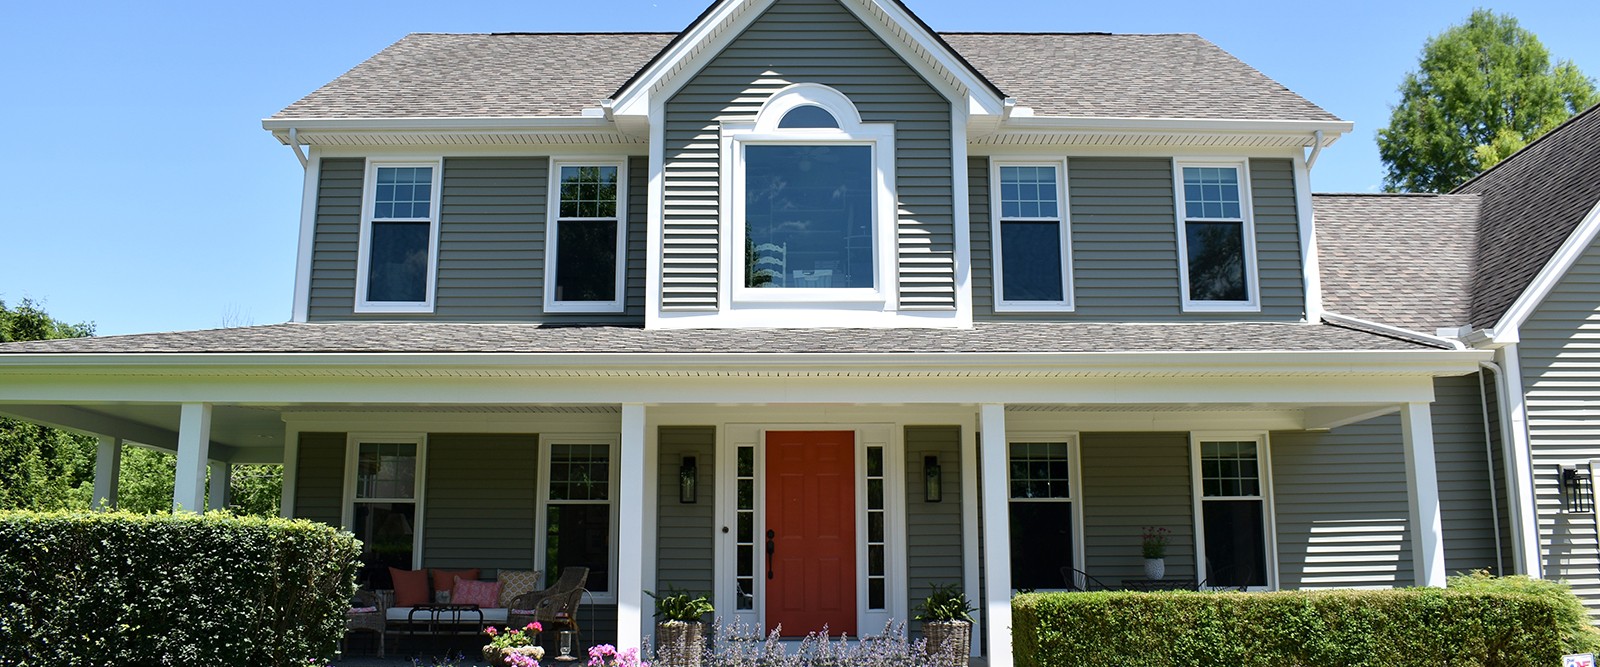 Home with Champion siding